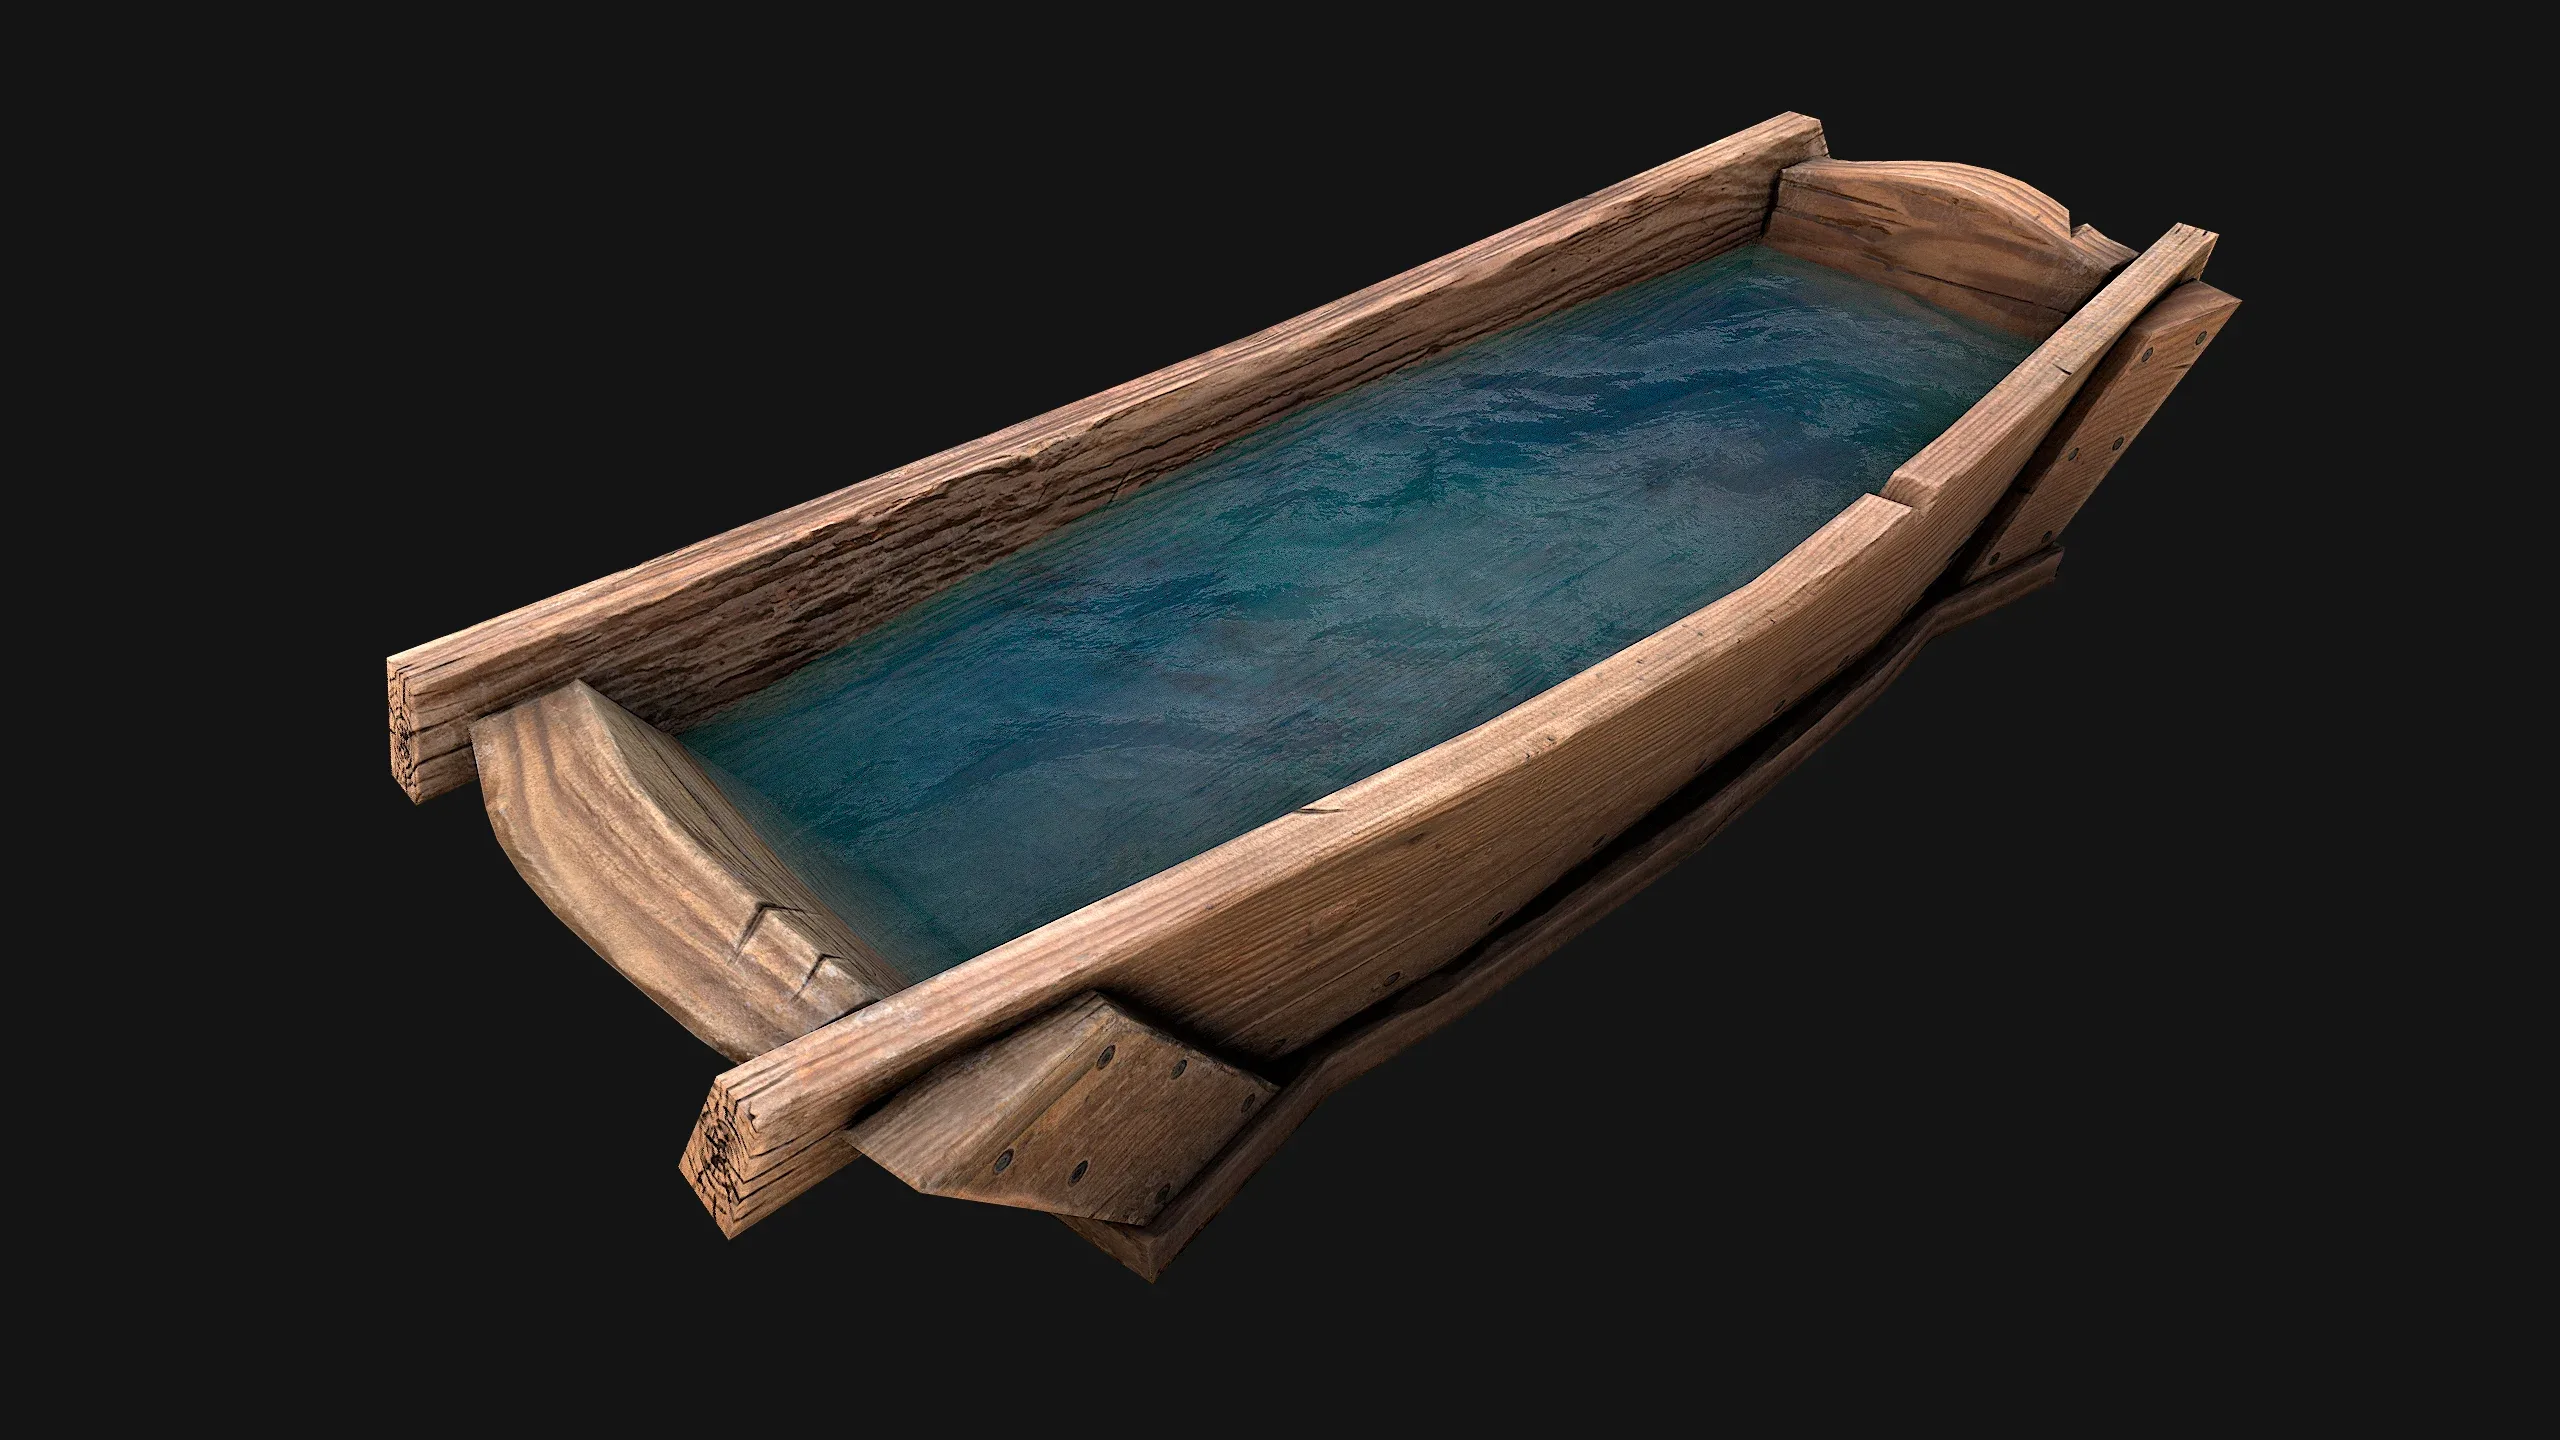 Medieval Trough with Water and Feed for Livestock